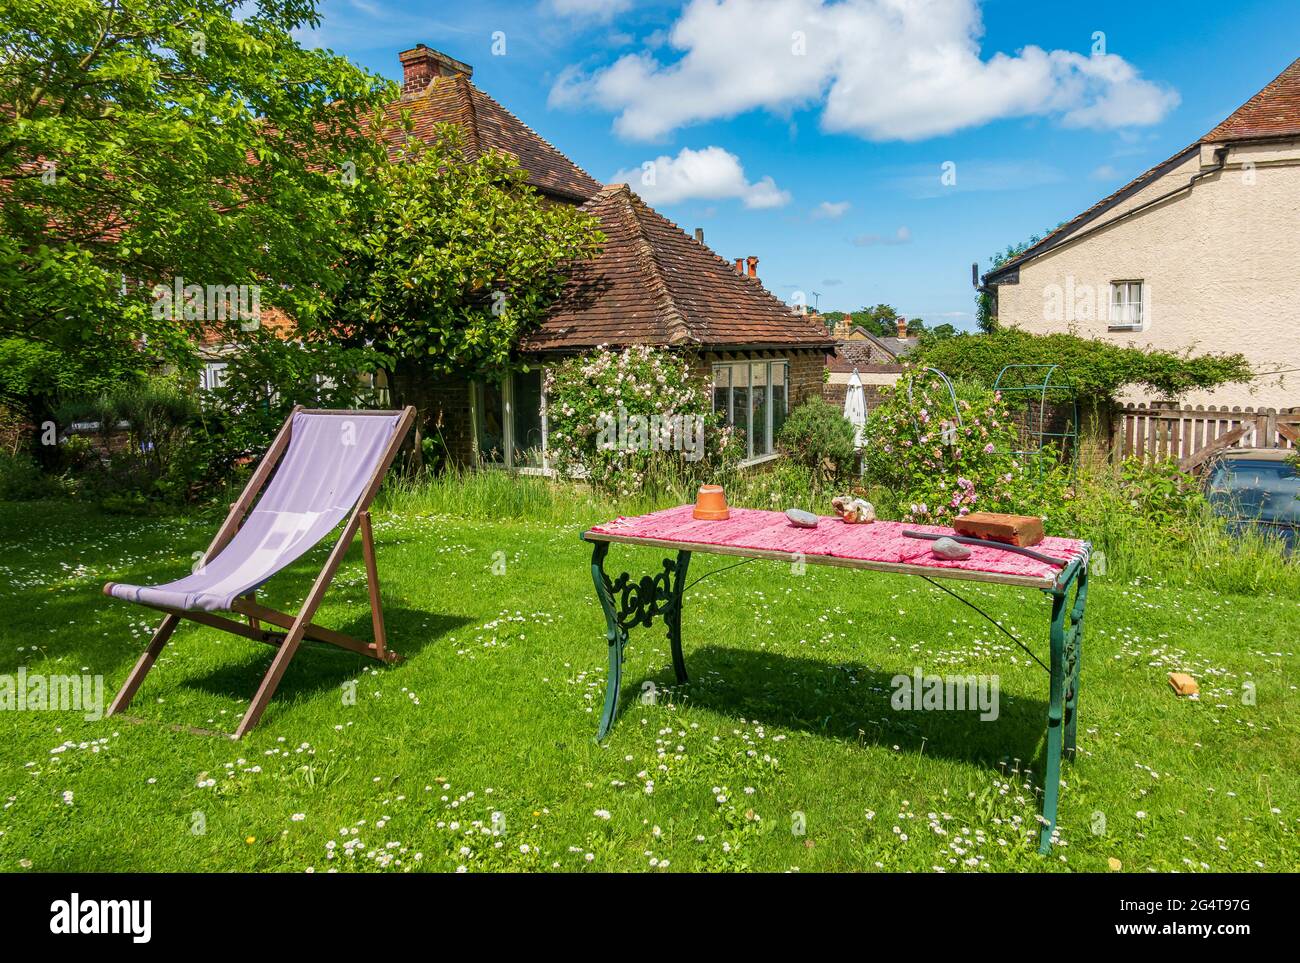 Cottage garden with deckchair and daisies in the lawn, Kent, UK Stock Photo